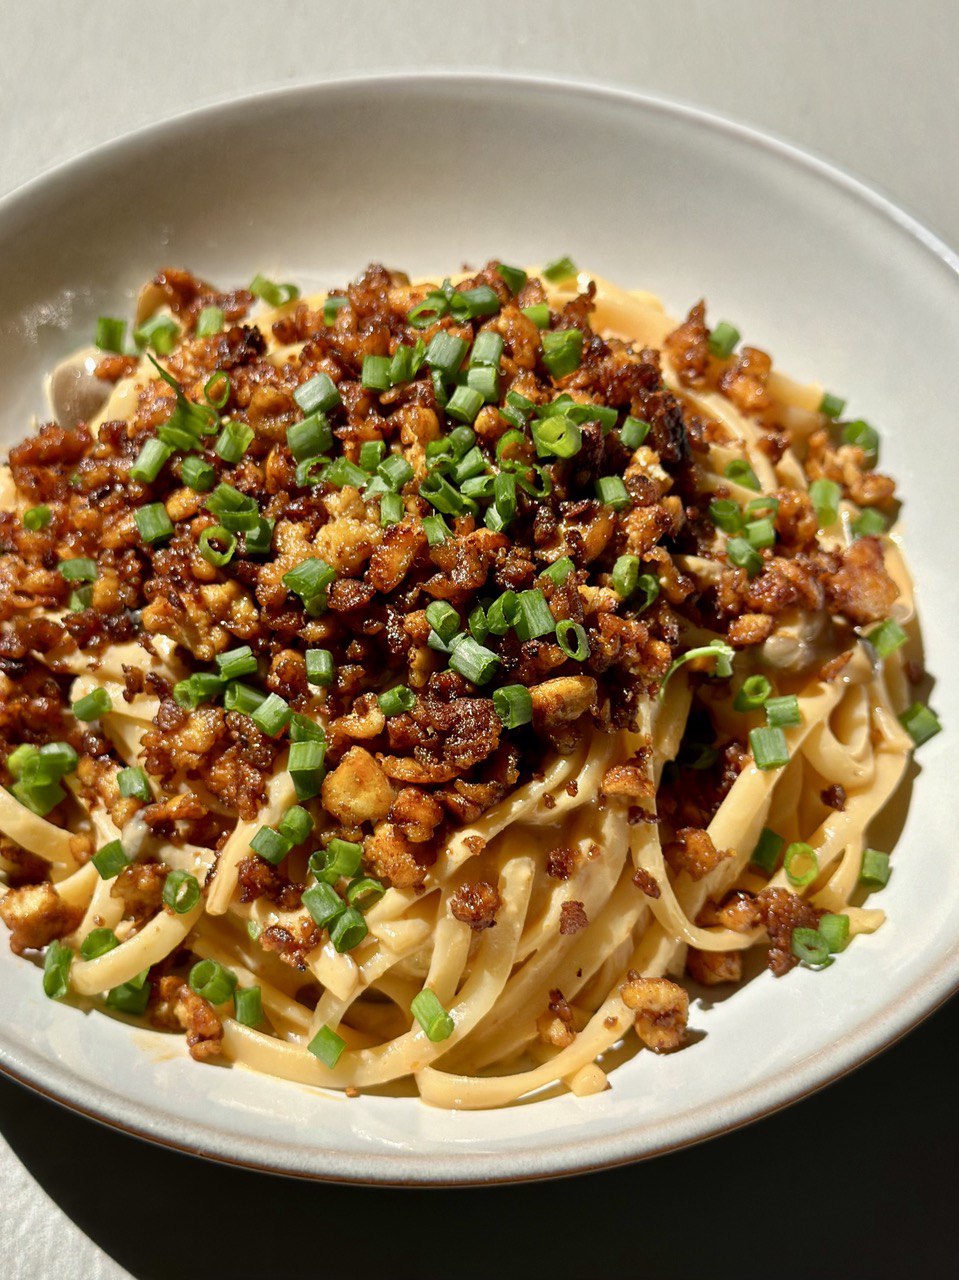 Spicy Miso Pasta with 5-Spice Tofu Crumble